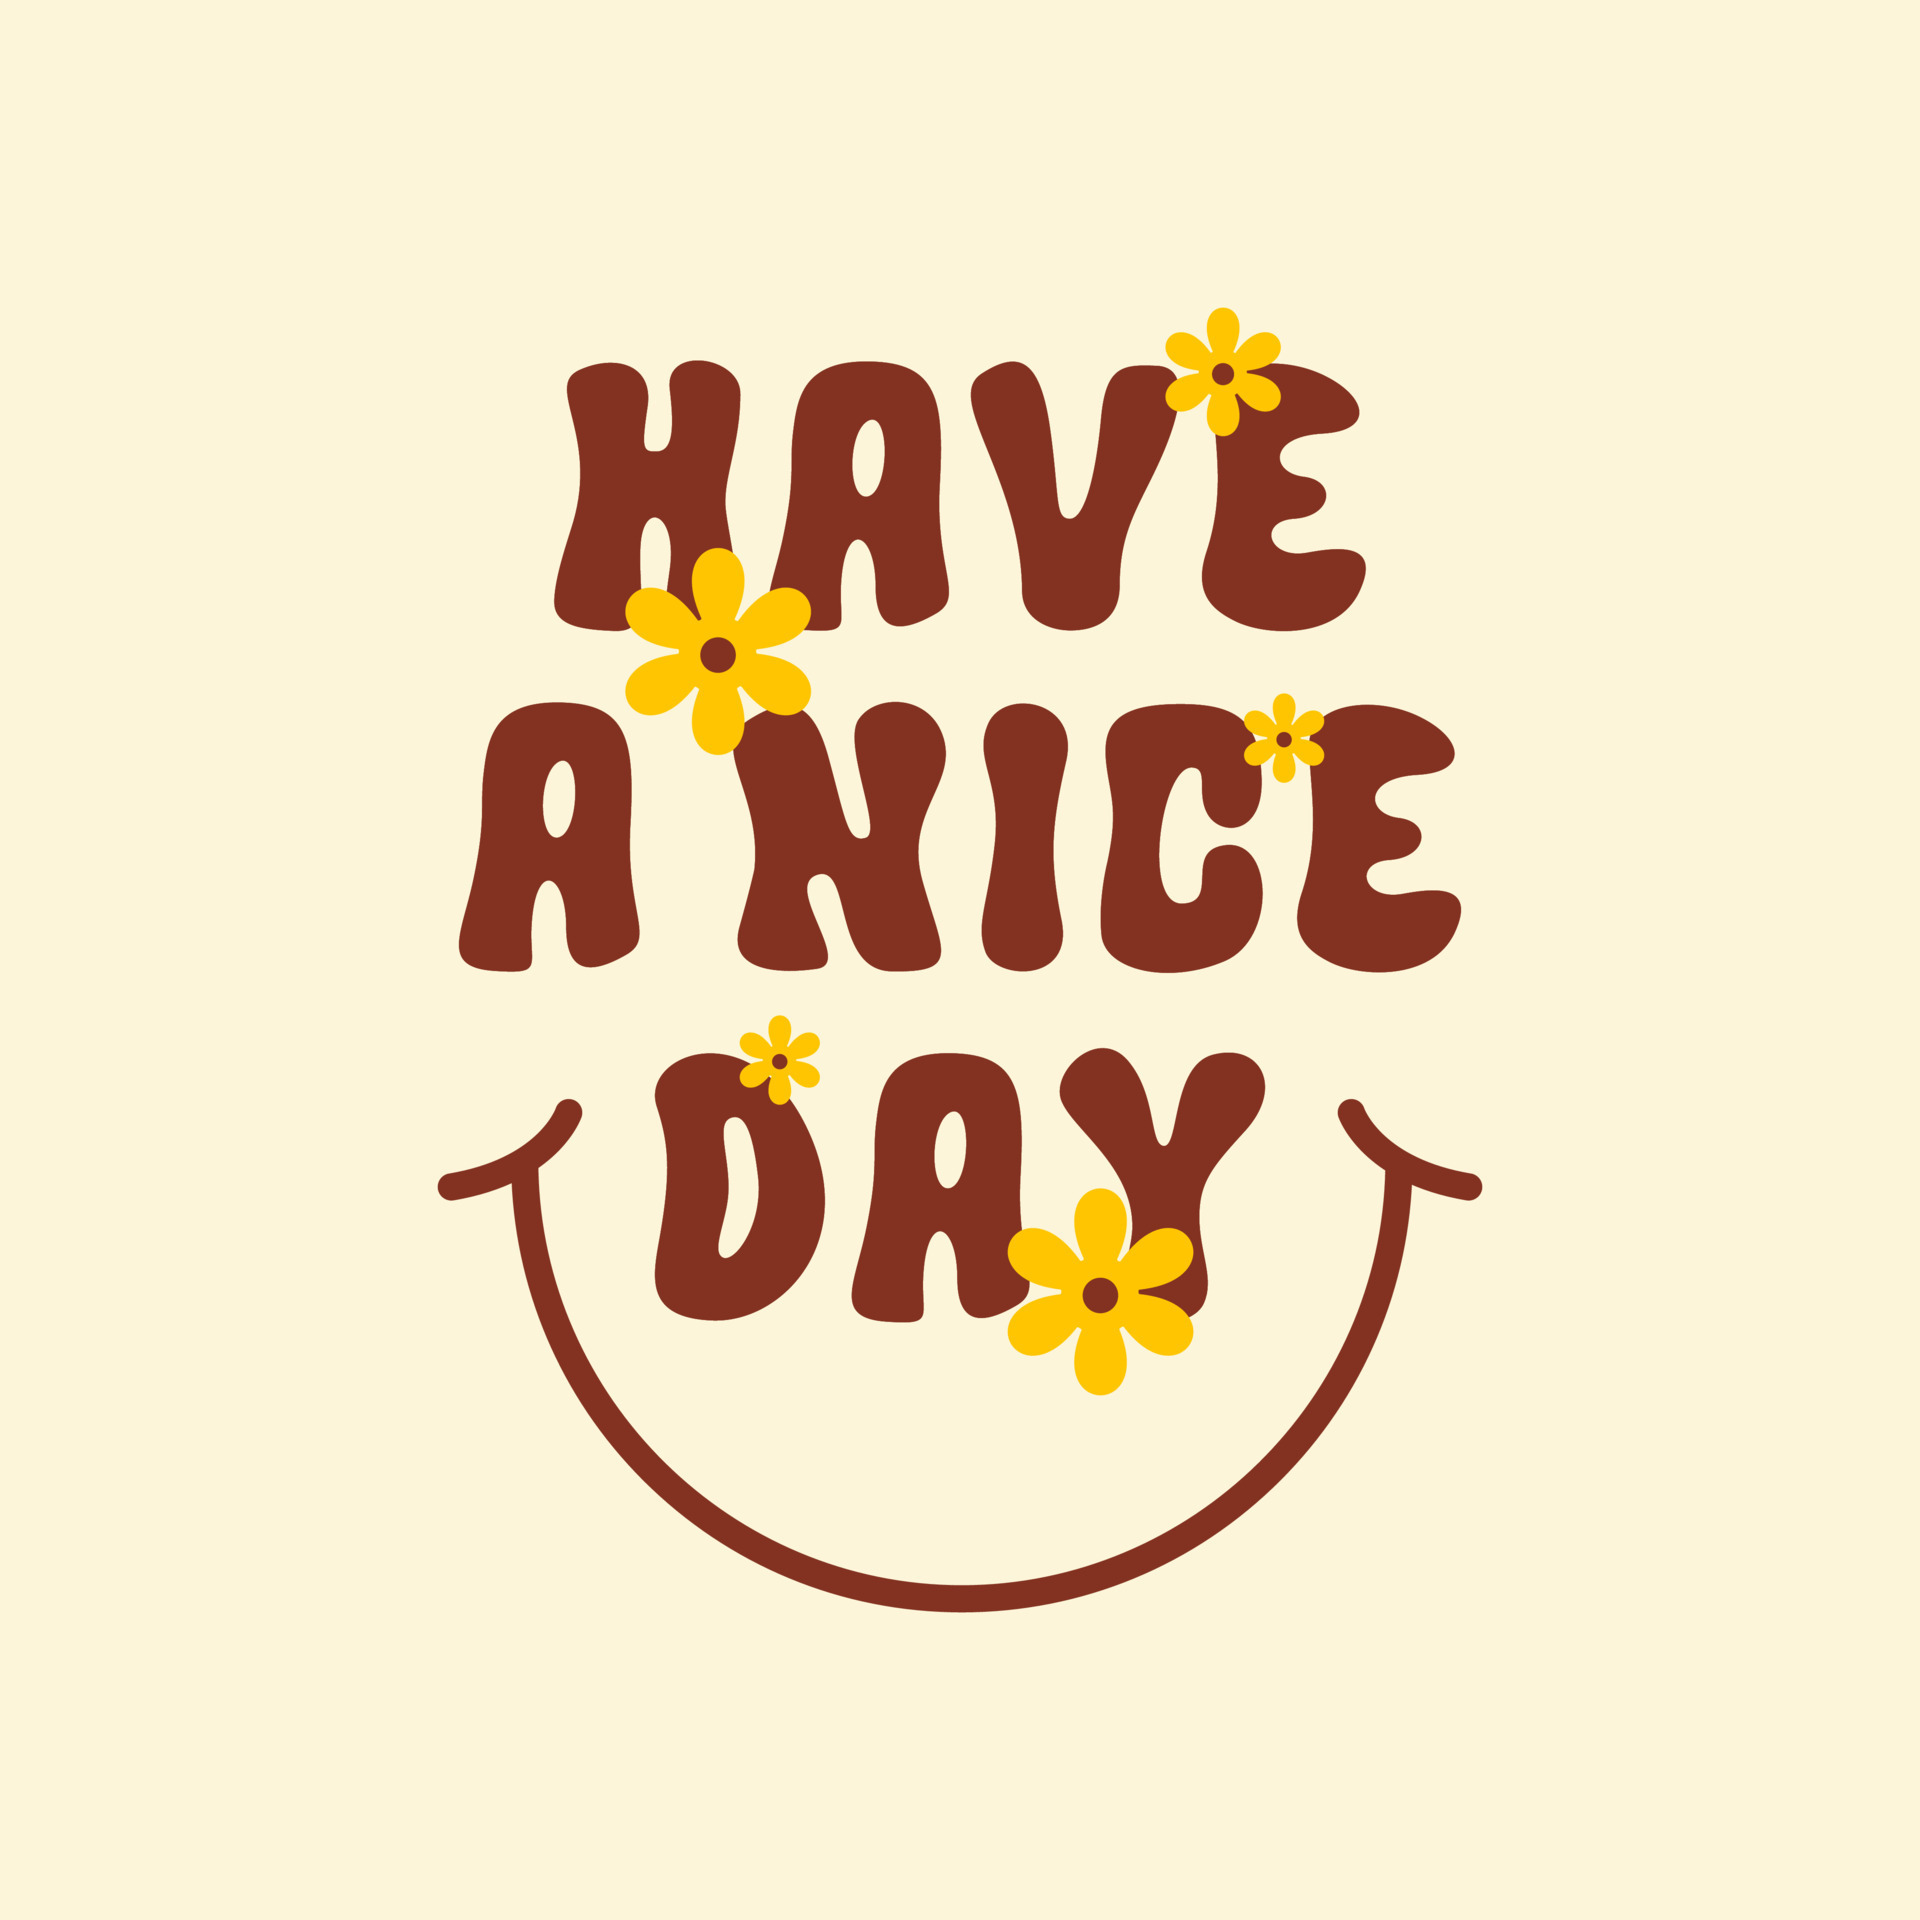 Have a nice day retro hippie design illustration, positive message